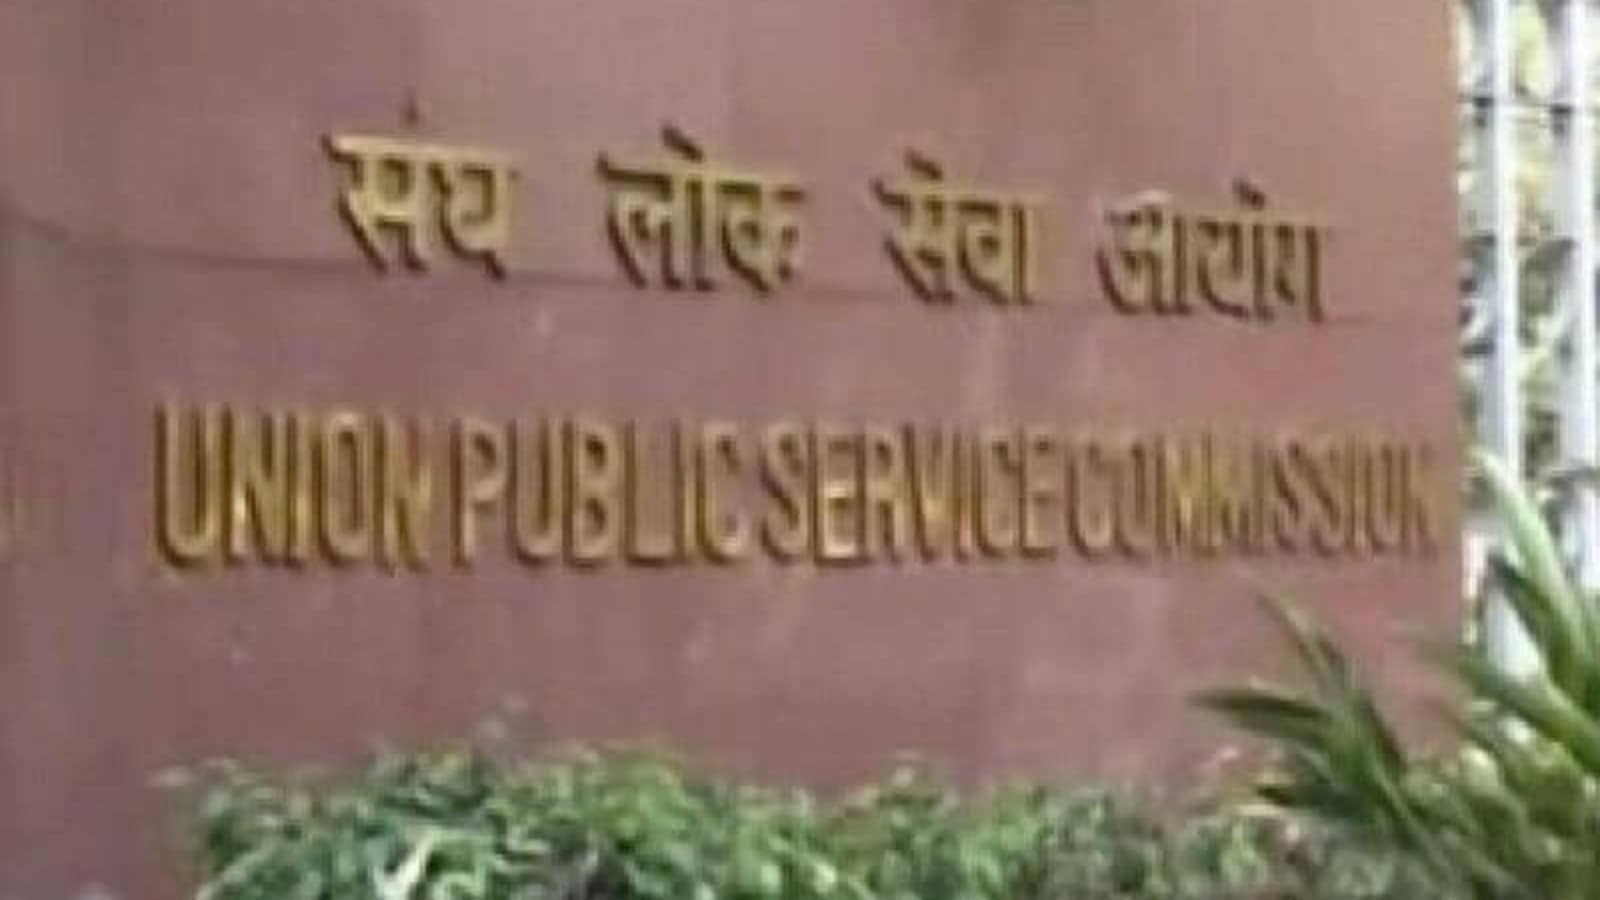 UPSC Cut Off 2021: Detailed Analysis - ClearIAS